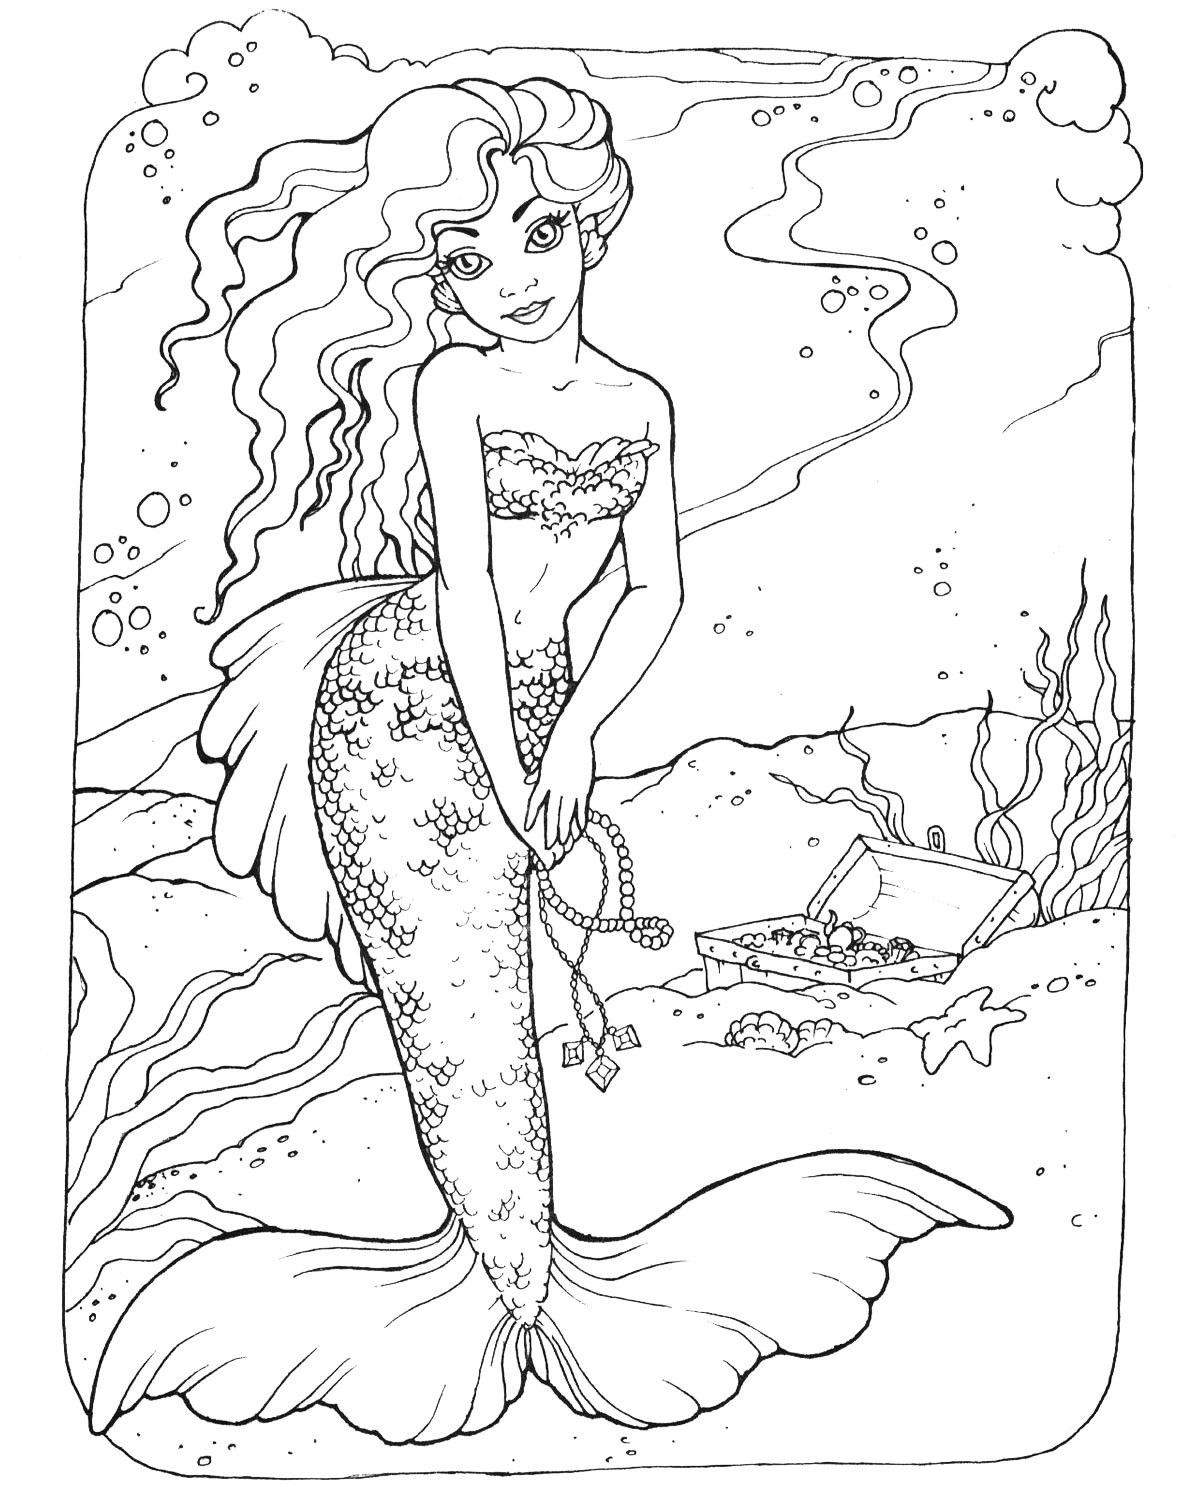 Mermaid Coloring Pages for Adults Best Coloring Pages For Kids